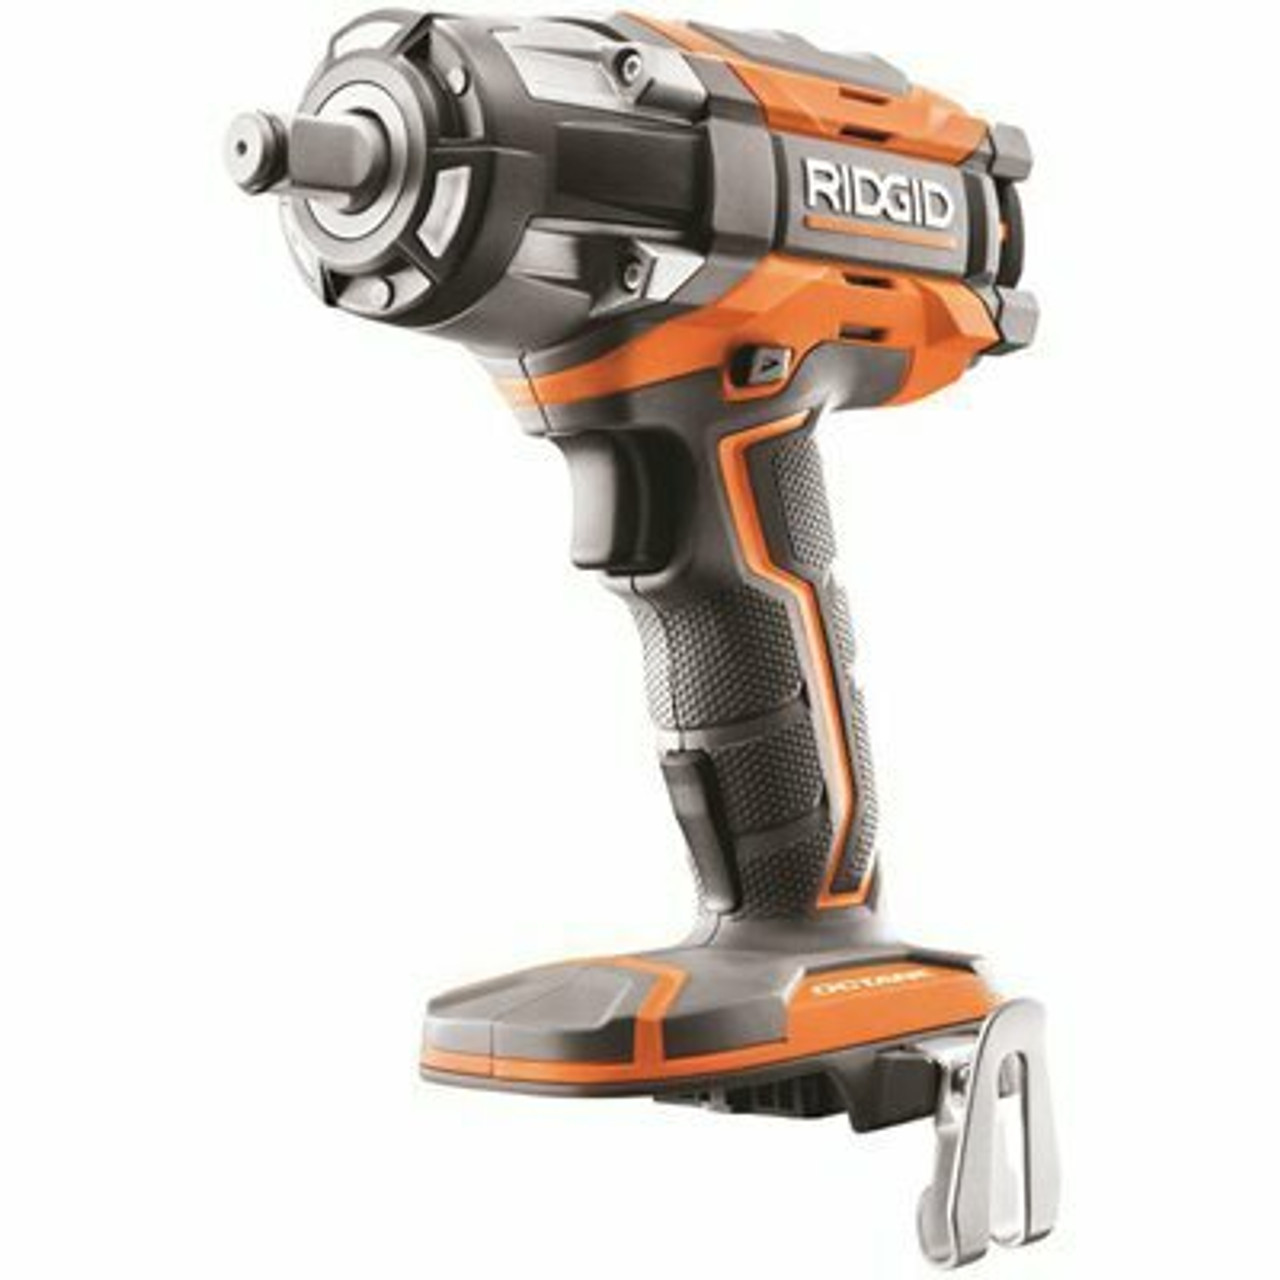 Ridgid 18V Octane Brushless Cordless 1/2 In. Impact Wrench (Tool Only) With Belt Clip